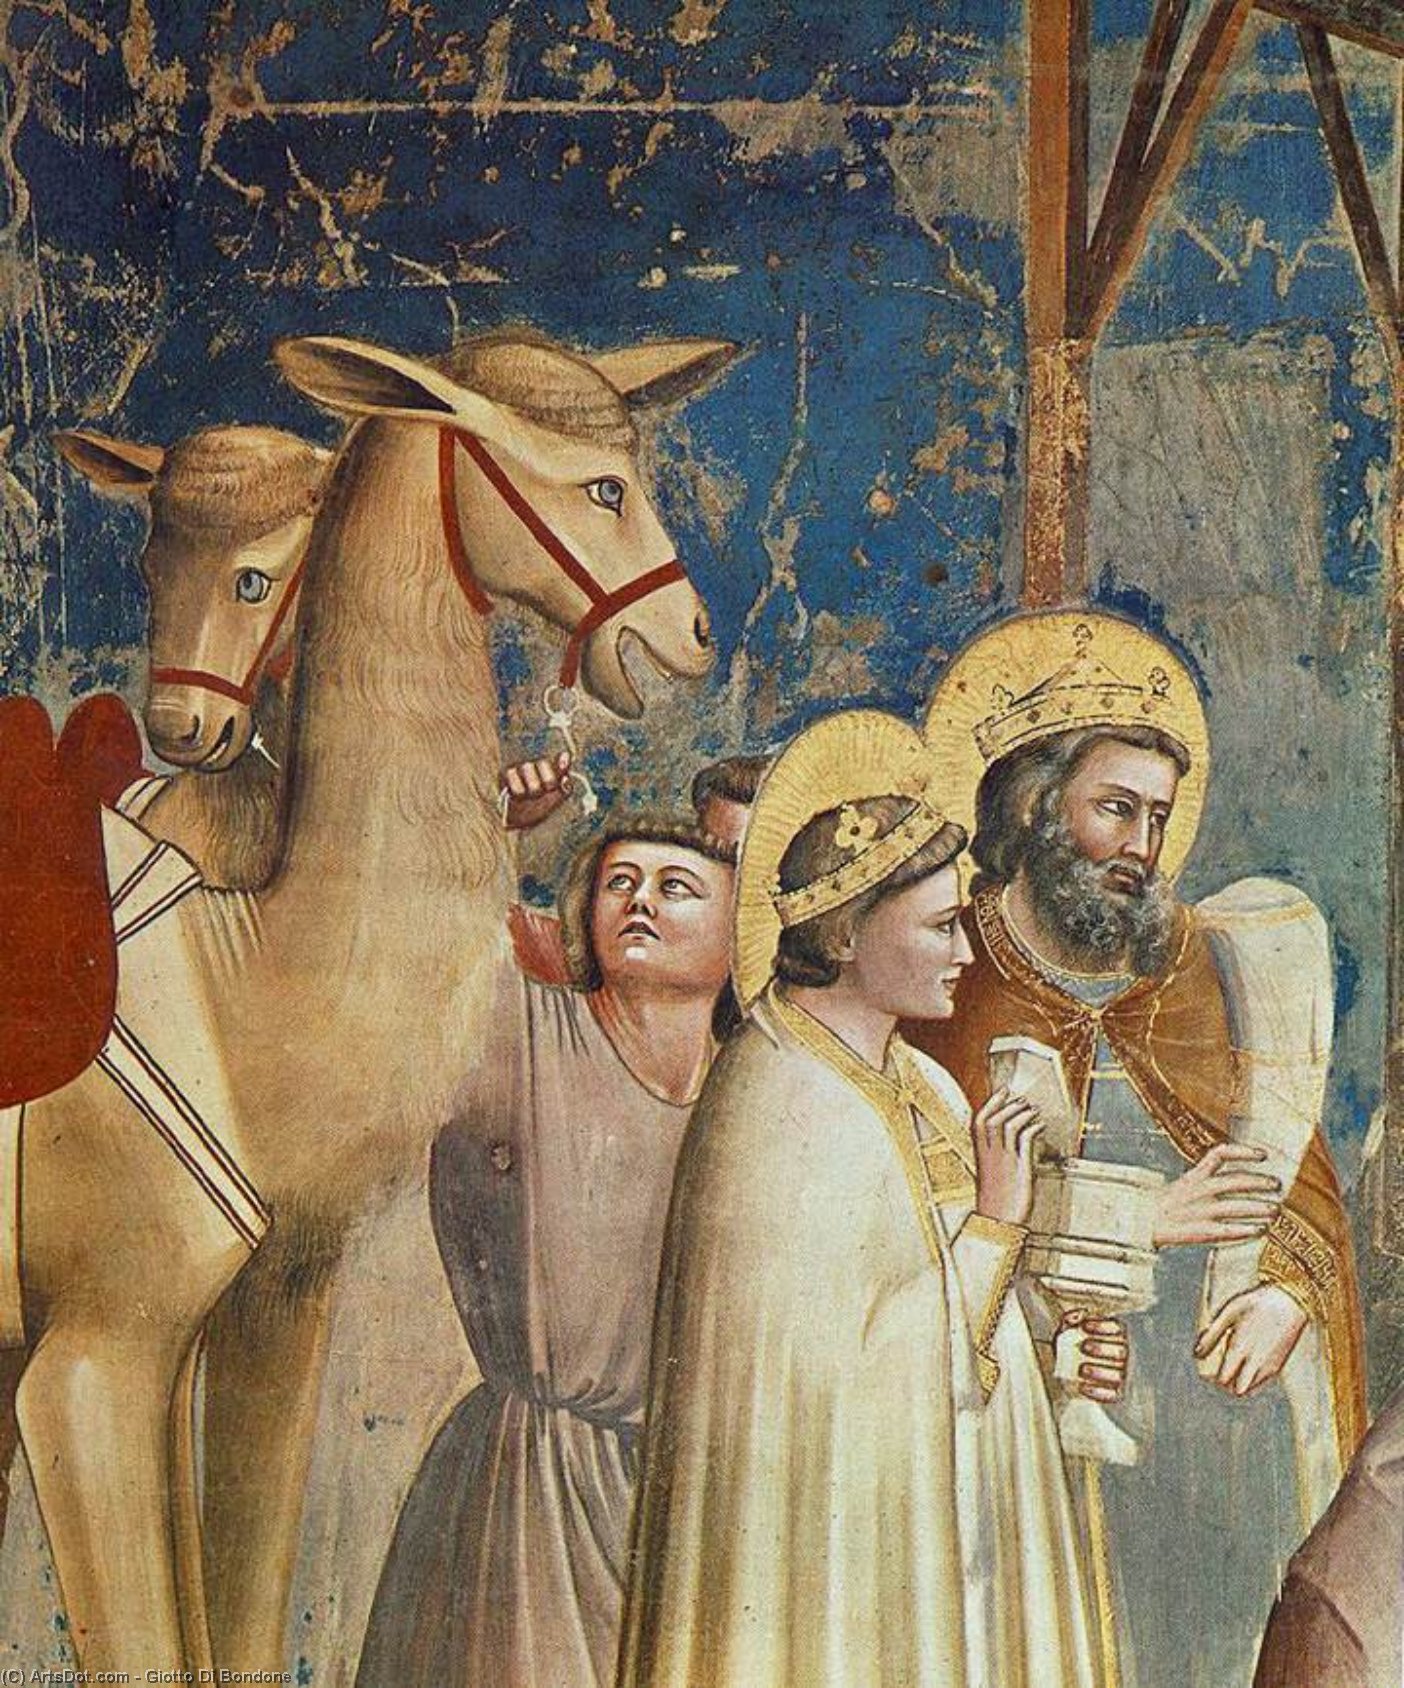 WikiOO.org - Encyclopedia of Fine Arts - Maľba, Artwork Giotto Di Bondone - No. 18 Scenes from the Life of Christ: 2. Adoration of the Magi (detail)